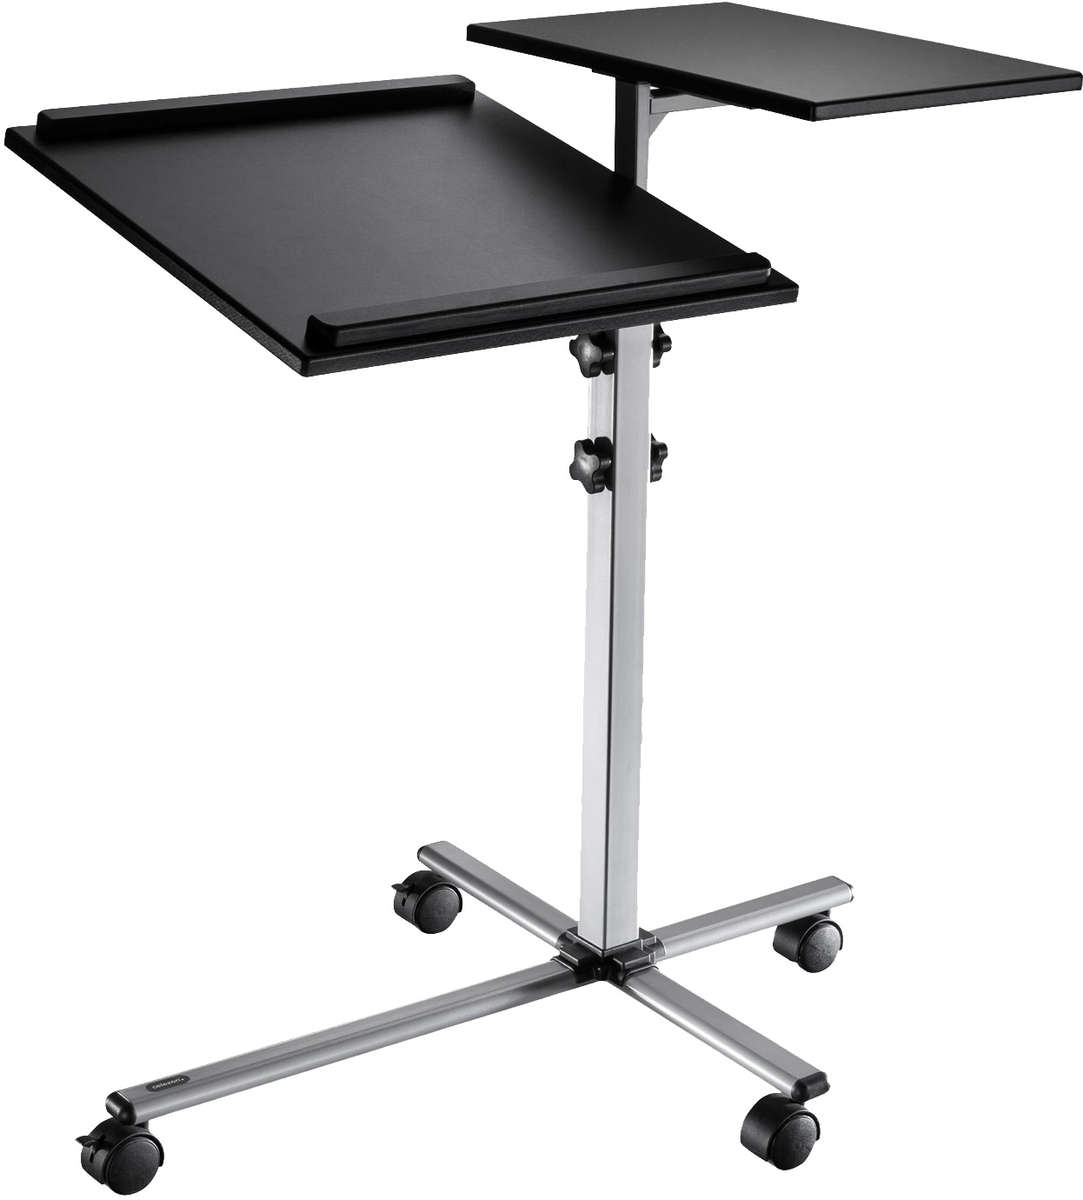 Celexon PT3010 Height adjustable twin-shelf projector tilting projection trolley finished in grey product image. Click to enlarge.